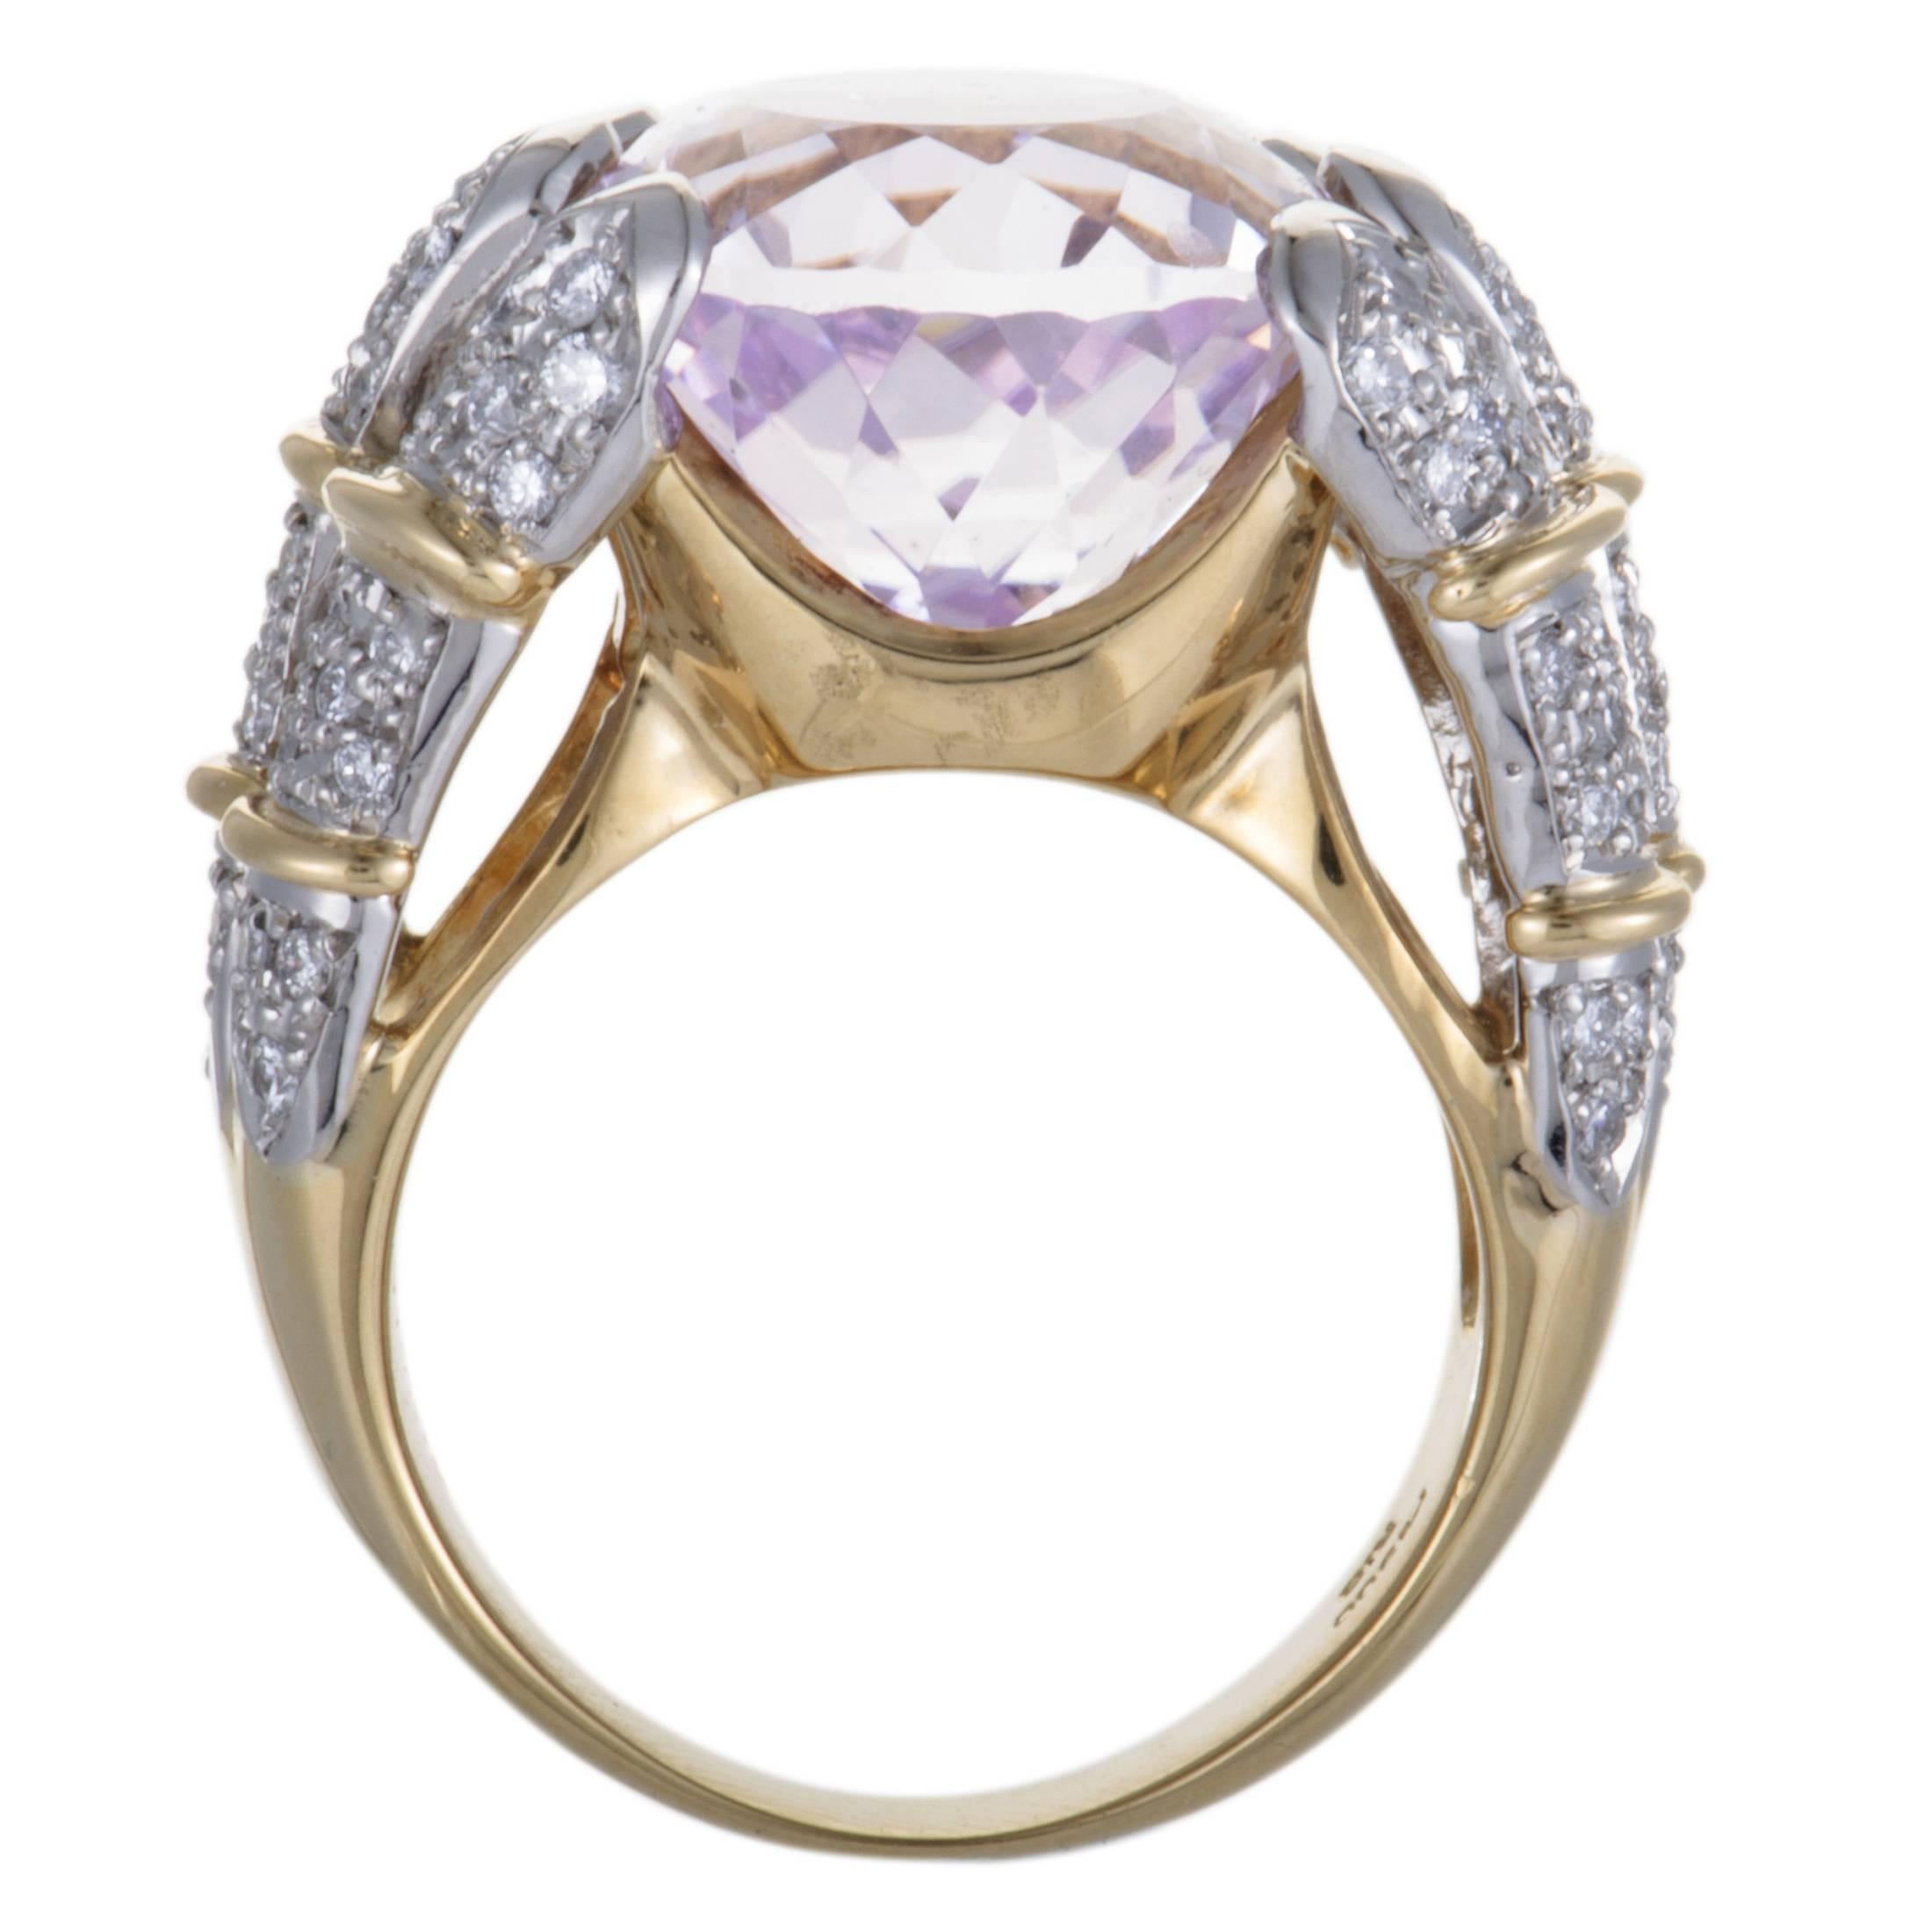 Embellished in 0.70ct diamonds and 17.35ct of magnificent kunzite stones, this superb ring embodies glamour and splendor. Stunningly crafted in a beautiful combination of 18K yellow and white gold, this attractive ring has a spellbinding